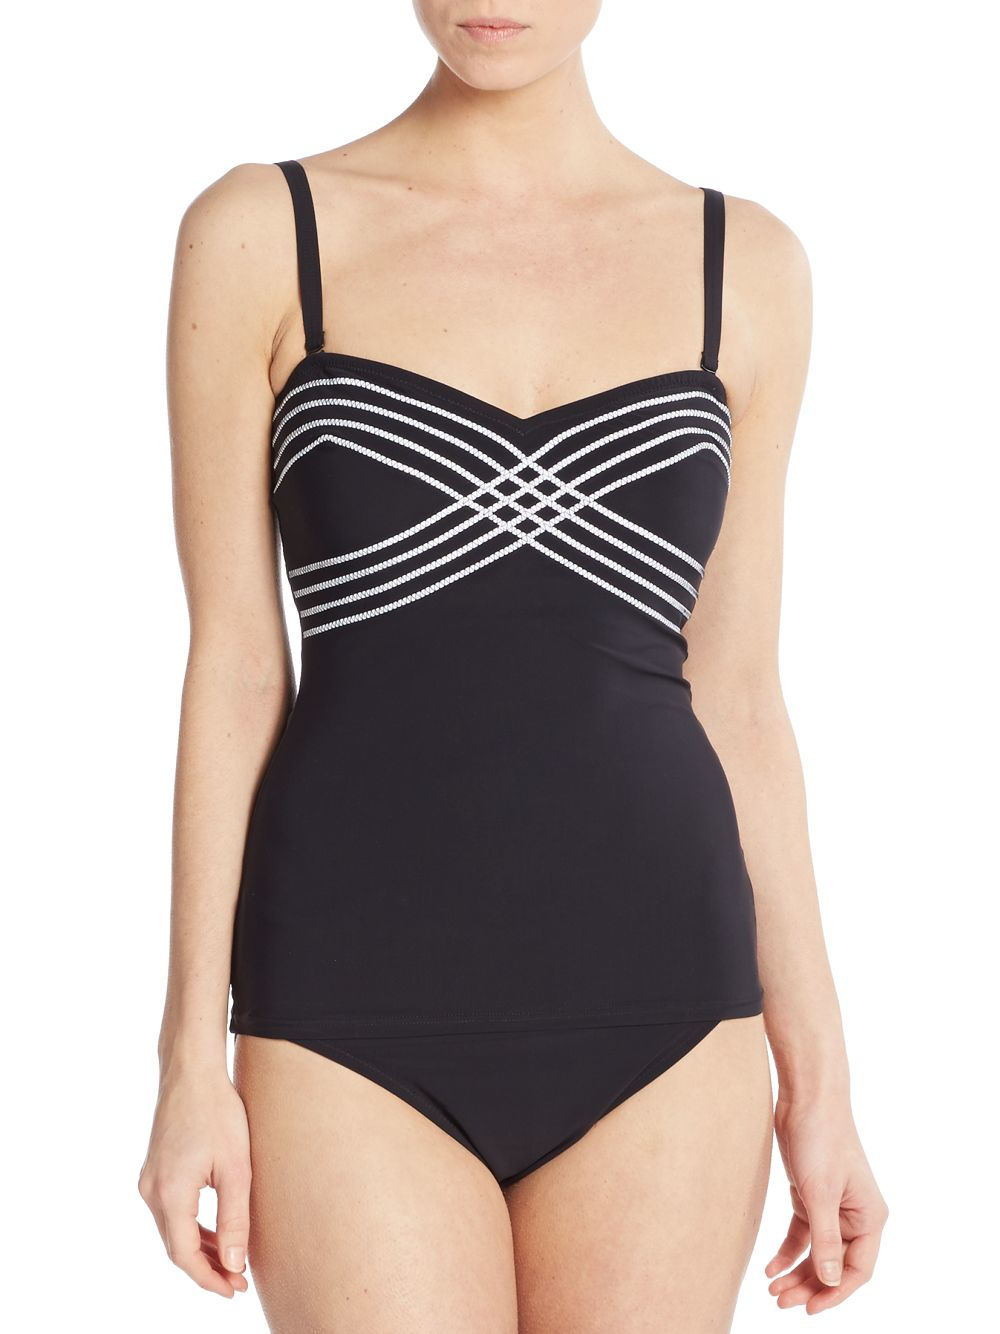 Lyst - Gottex Convertible Strapless Two-piece Tankini Swimsuit in Black